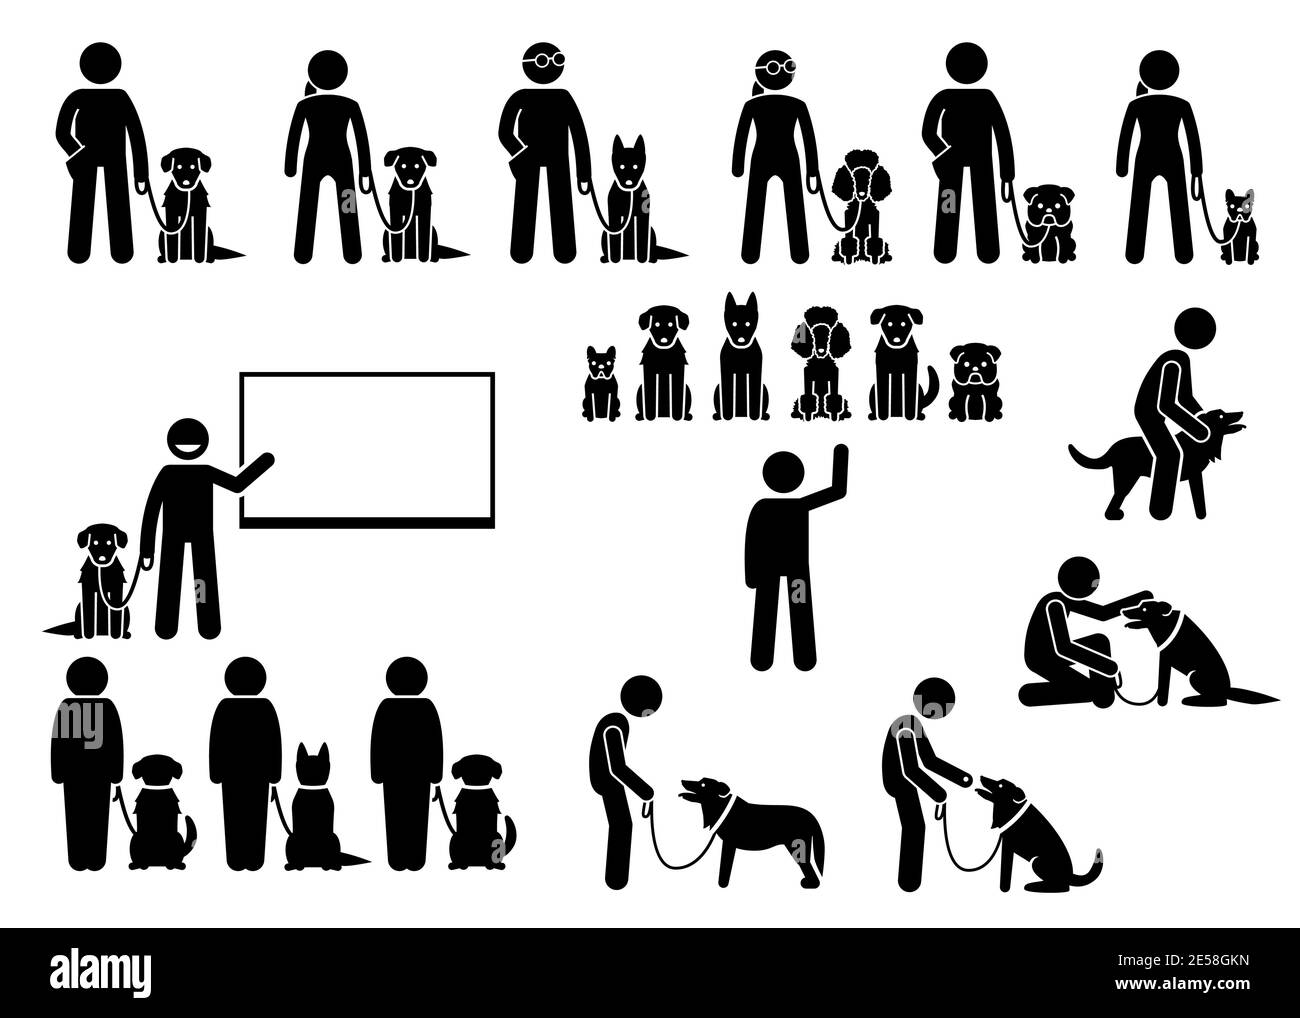 Dog training school icons set. Vector illustrations of dog obedient and behavioral training academy with instructor and students. Stock Vector